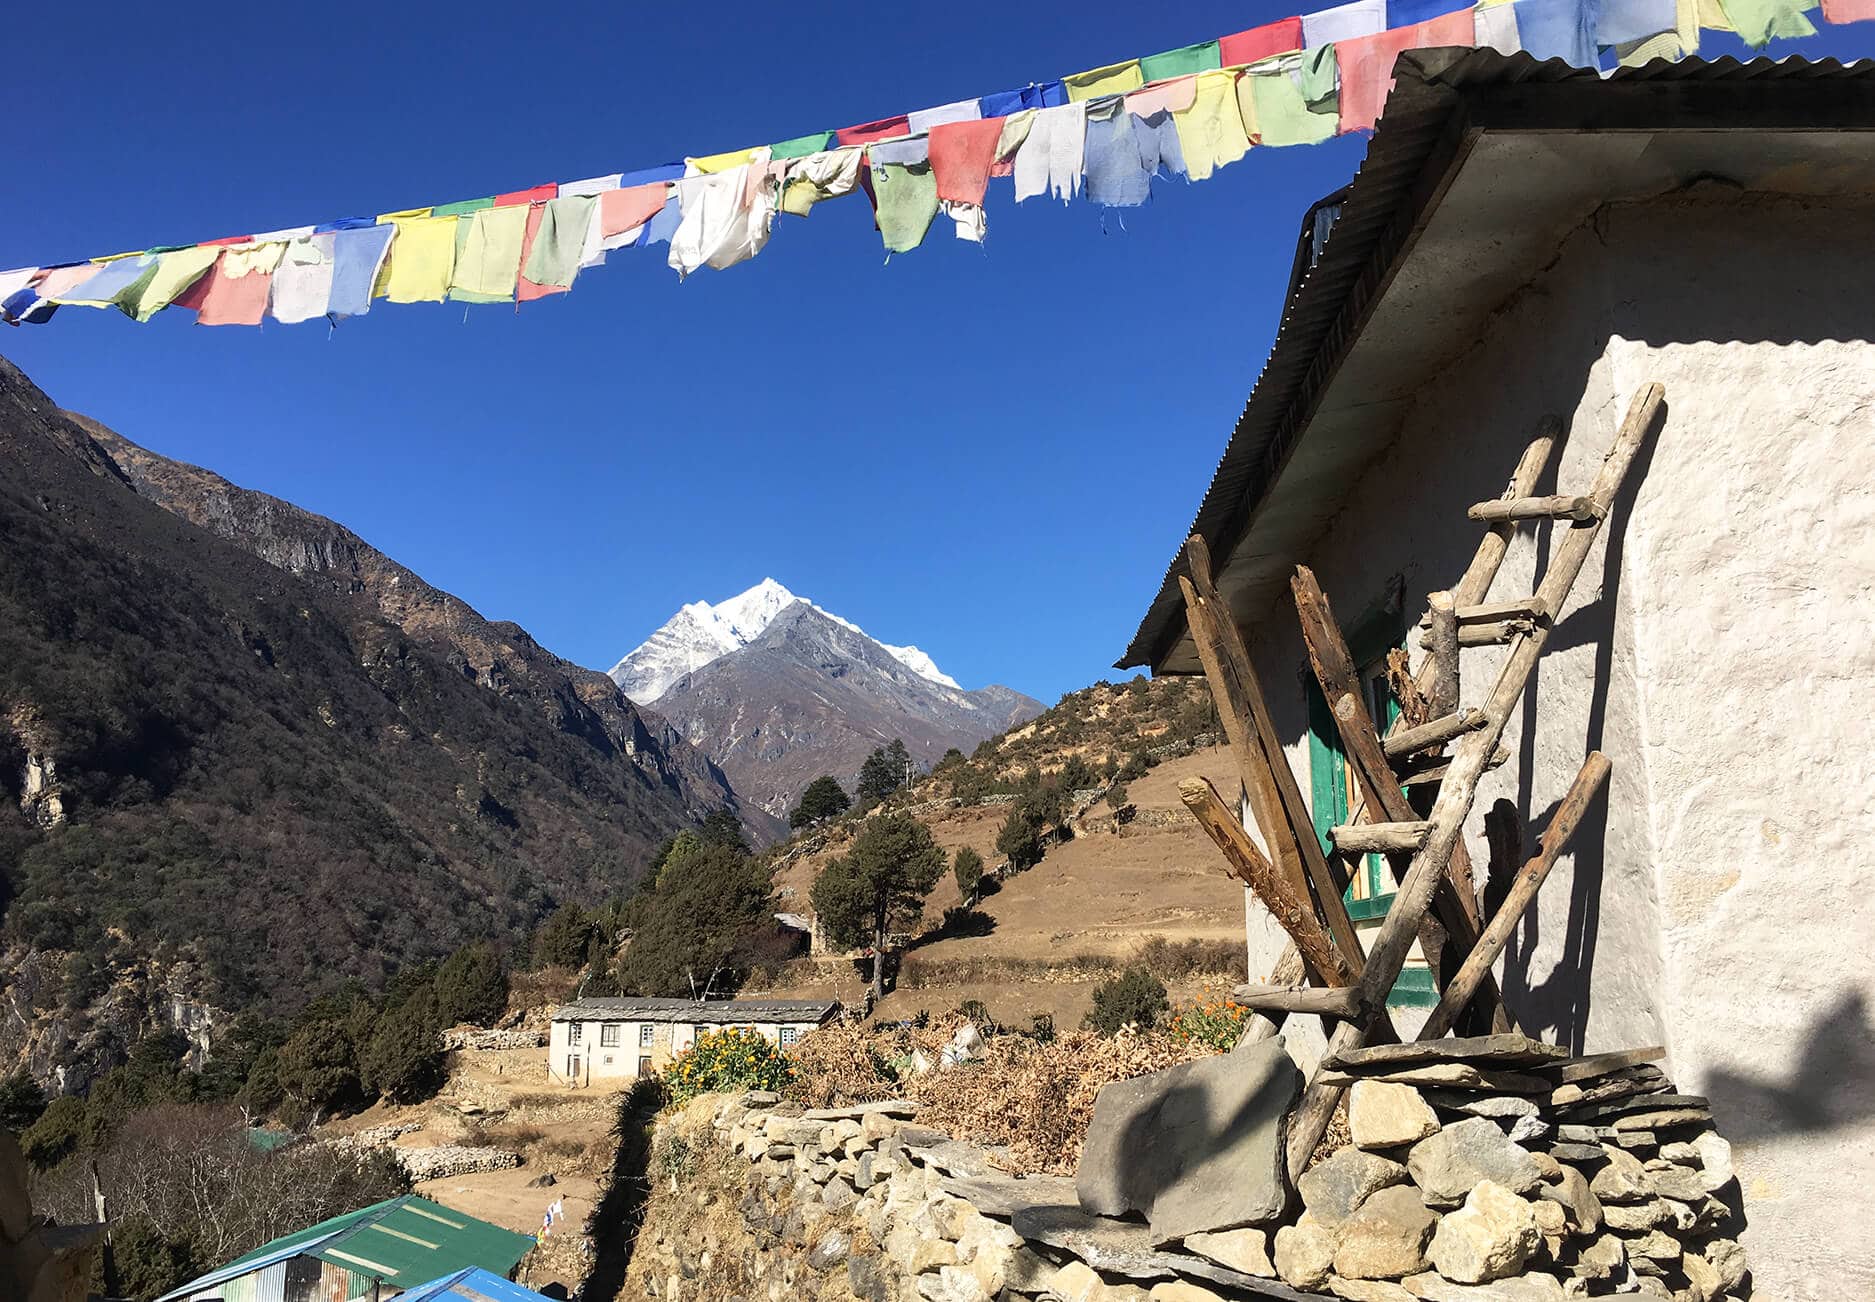 Travel bloggers reveal their most unforgettable travel experiences - Trekking to Everest Base Camp